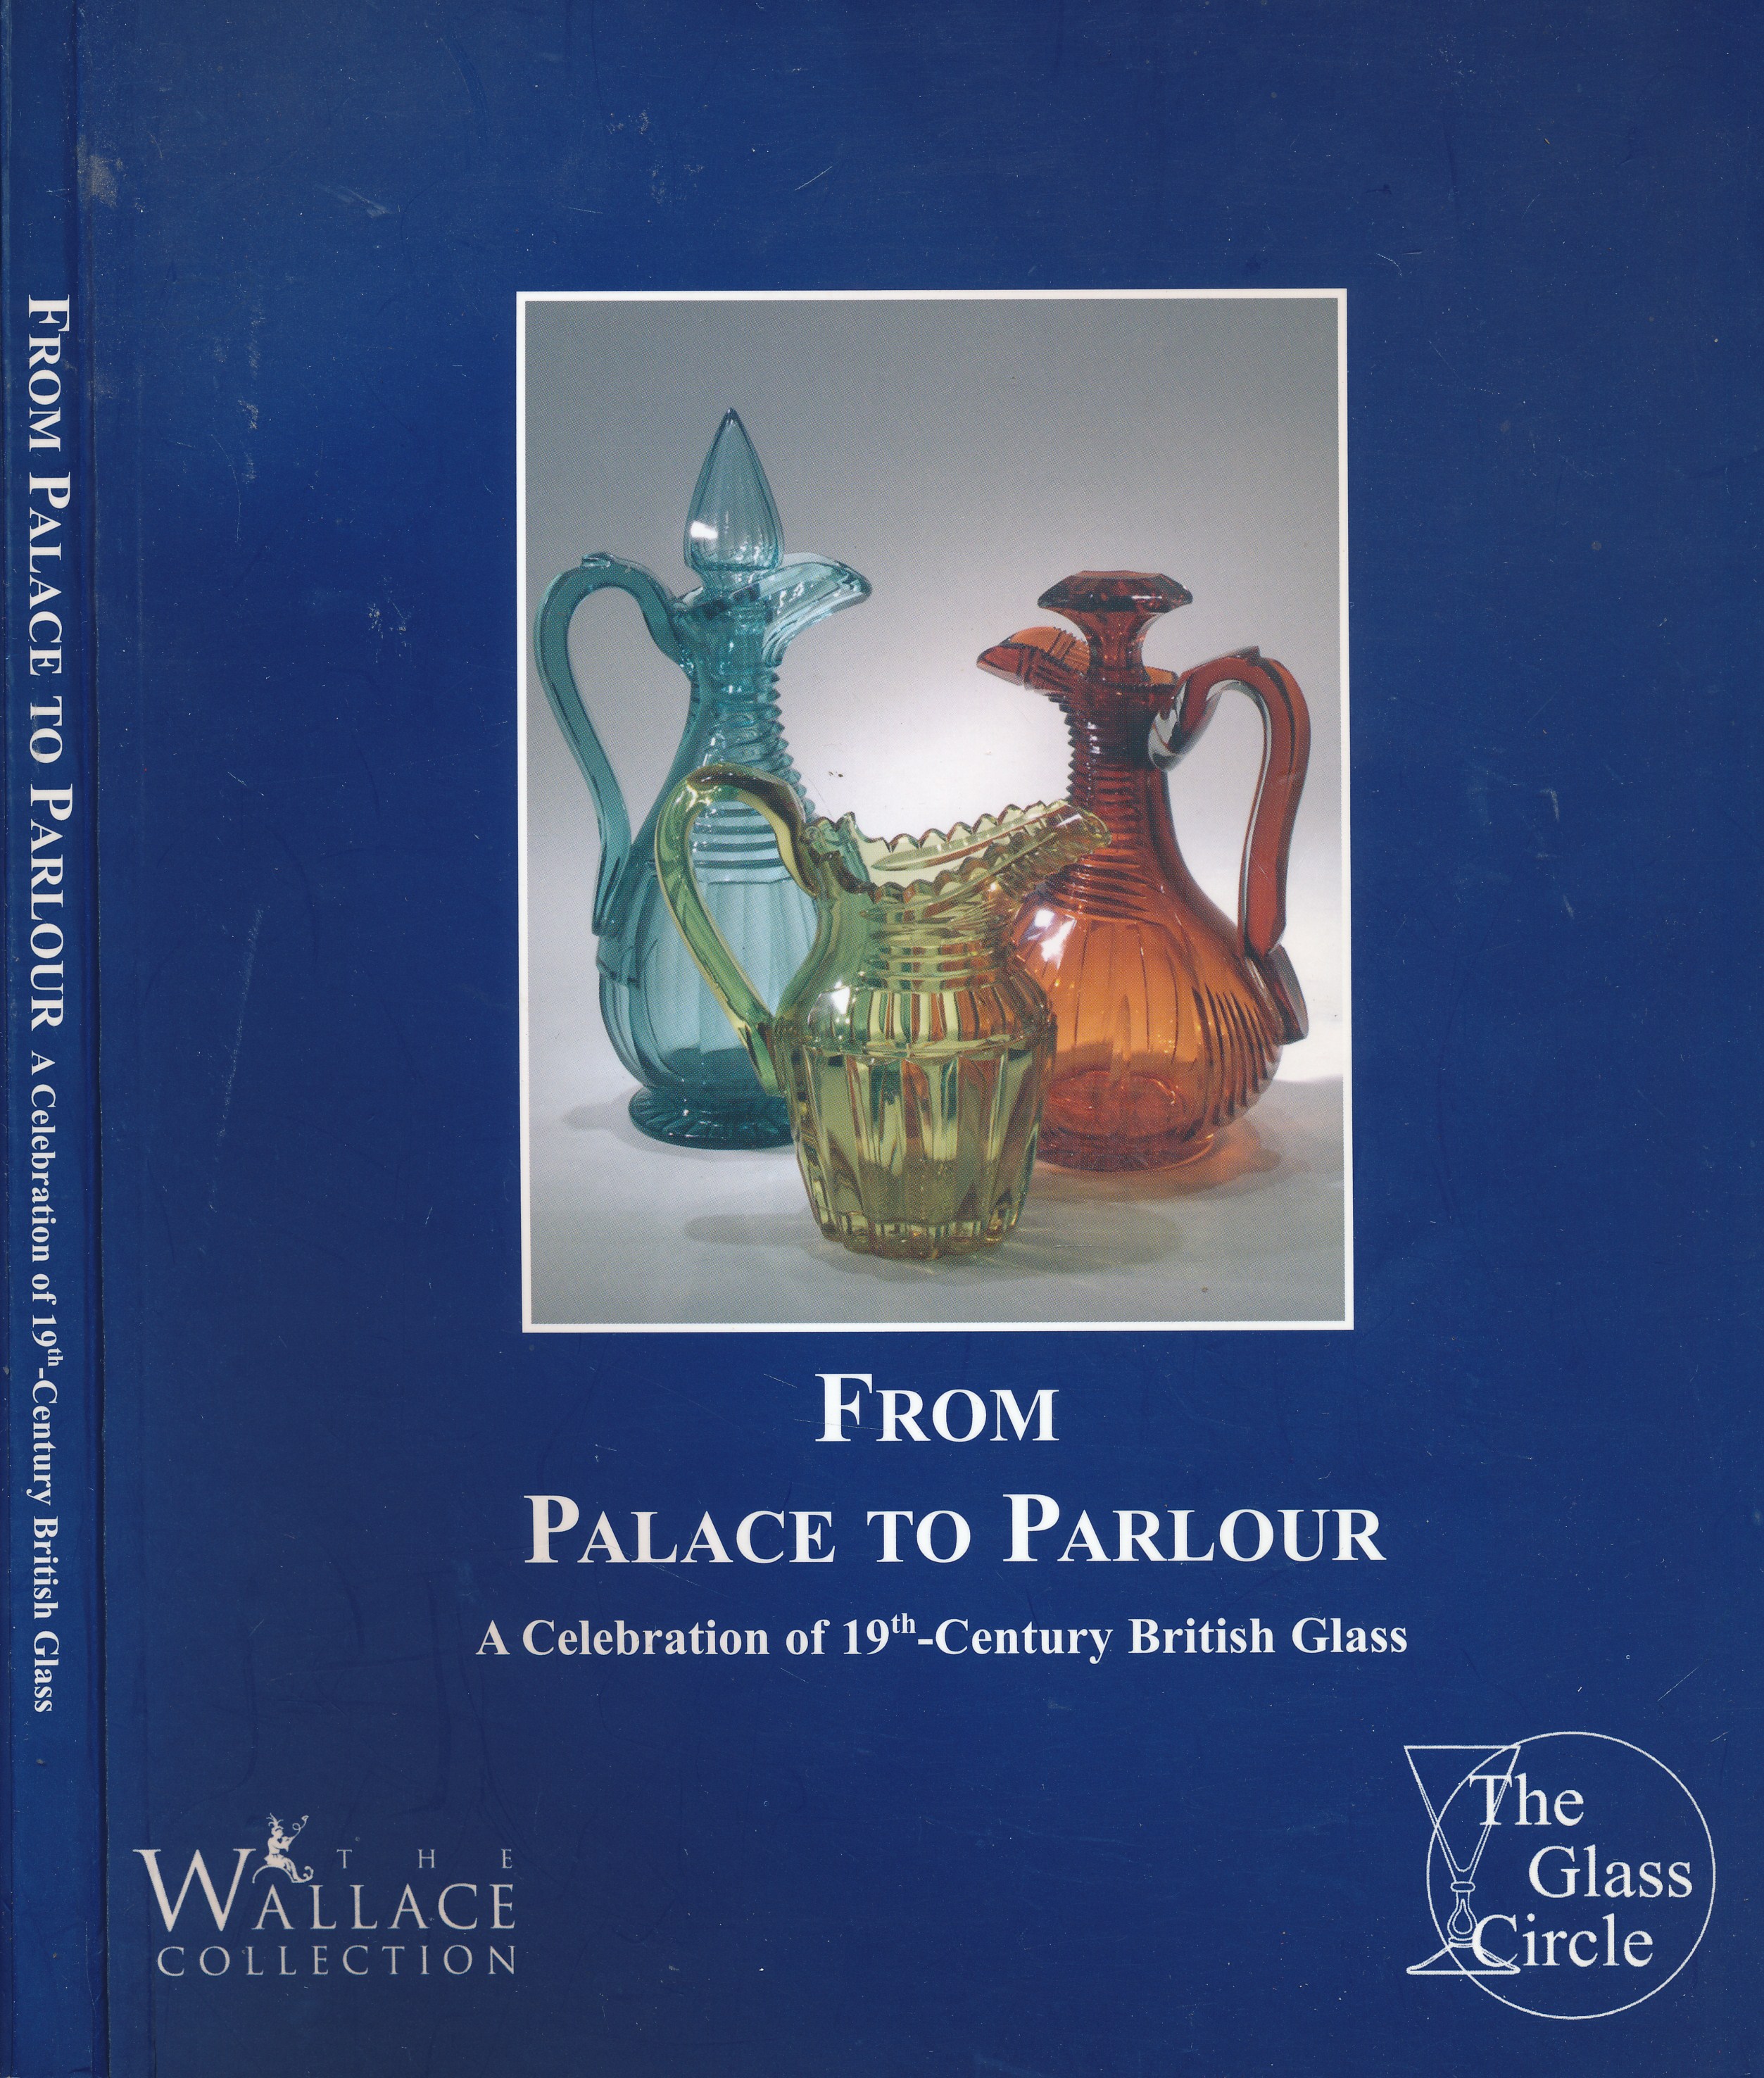 From Palace to Parlour: A Celebration of 19th Century British Glass